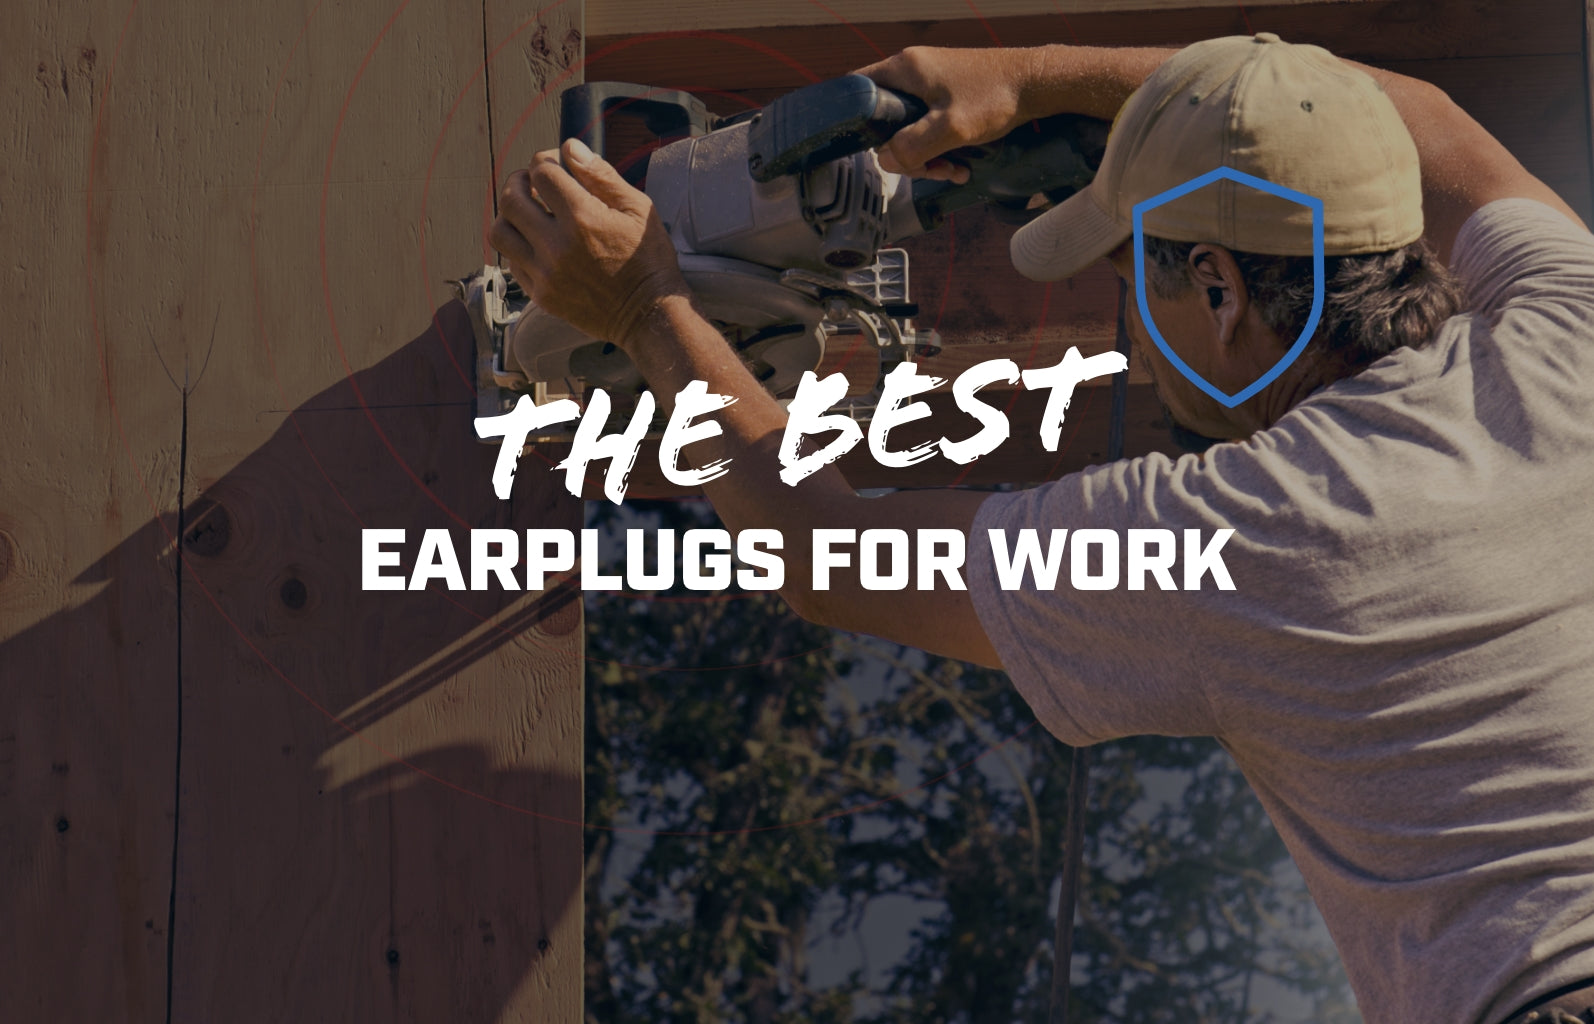 What Makes the Best Earplugs for Work